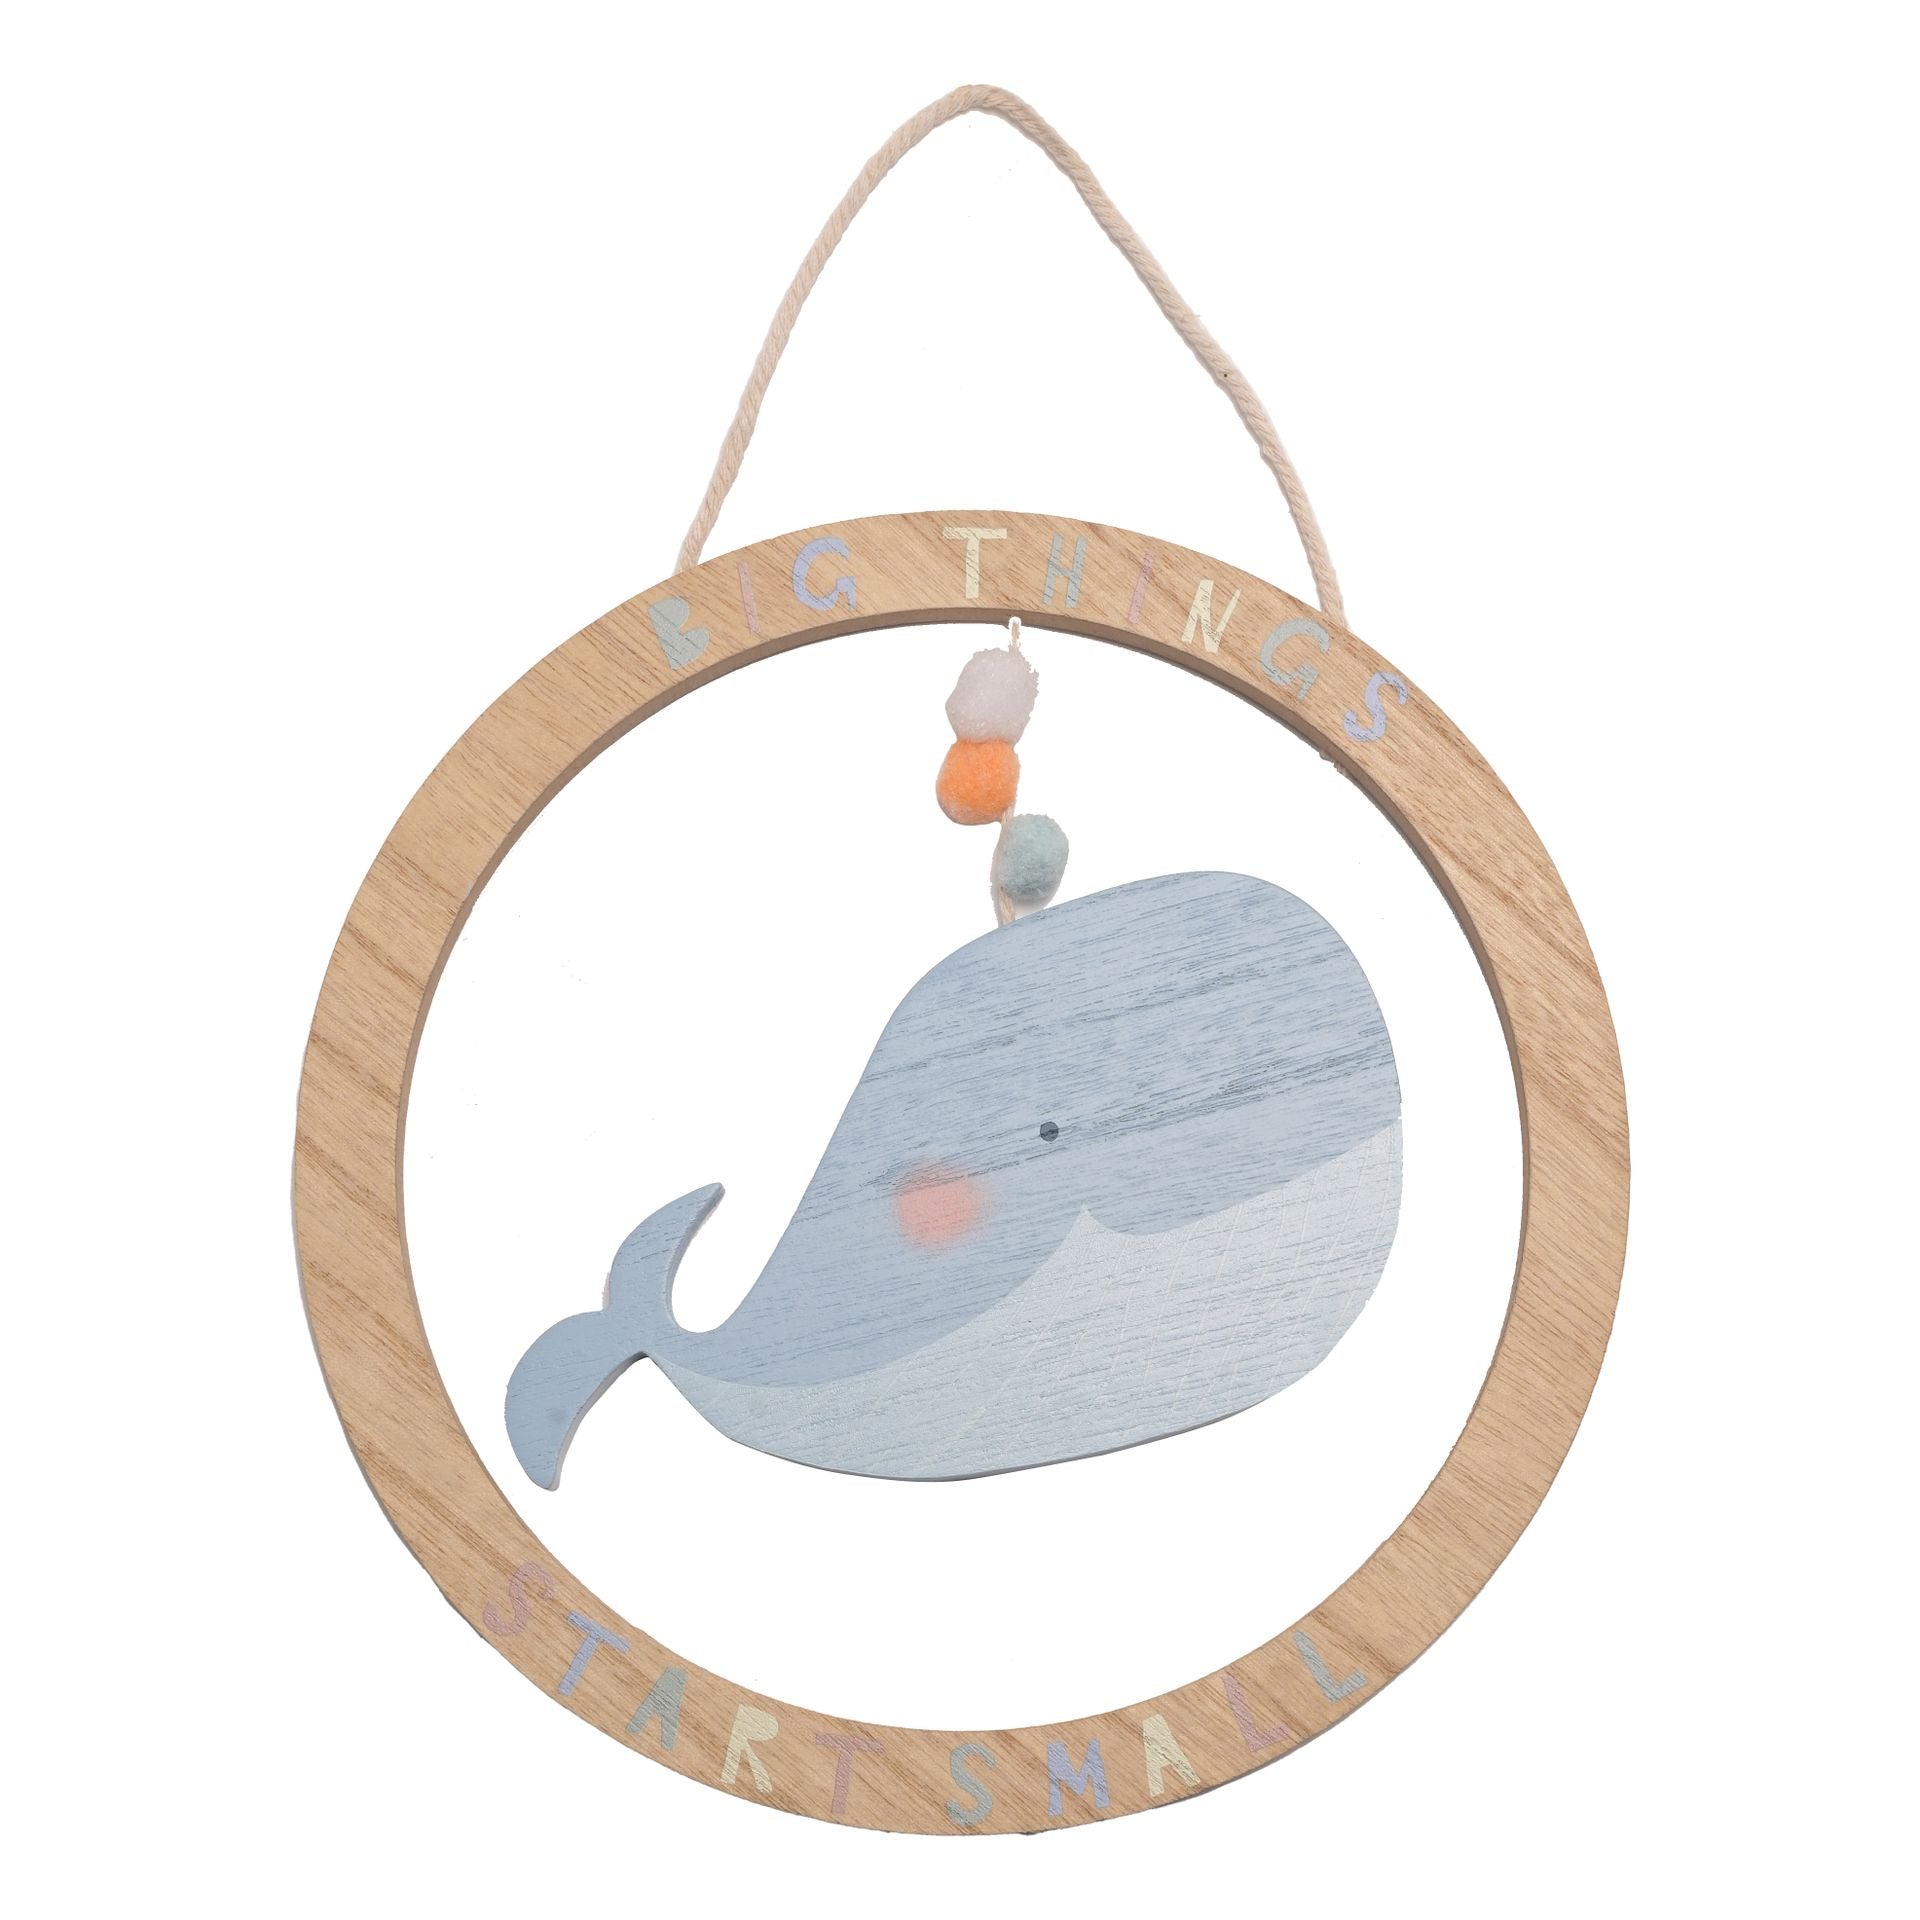 This Whale plaque features a beautiful blue whale with string hanger, and the inspirational message ‘Big Things Start Small’ stands out in a clean white font against the wooden background. 